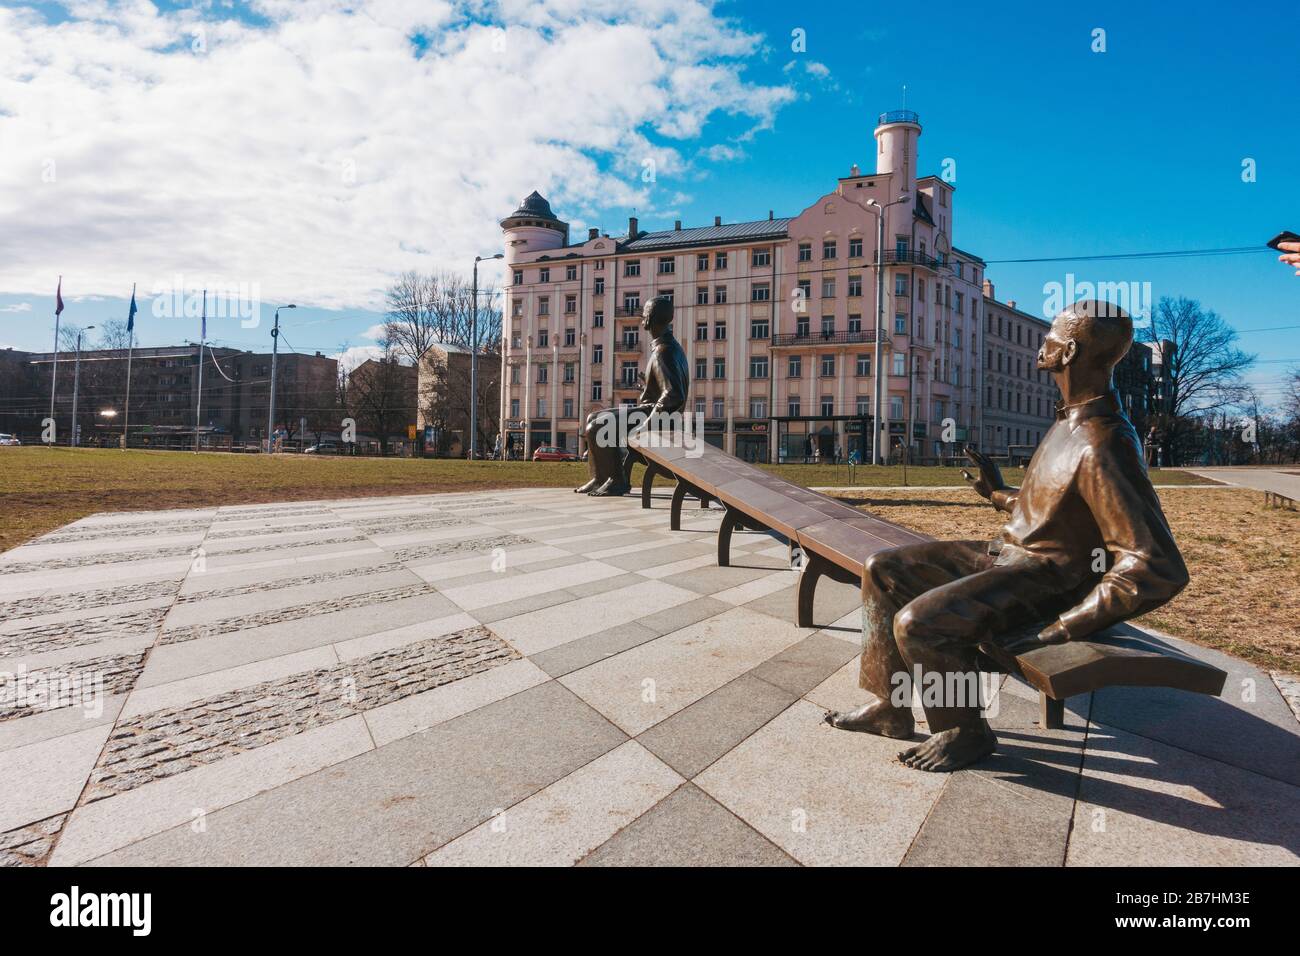 A sculpture of a small and large man on a seat - a play on perspective - in front of the Latvian National Library in Riga, Latvia Stock Photo